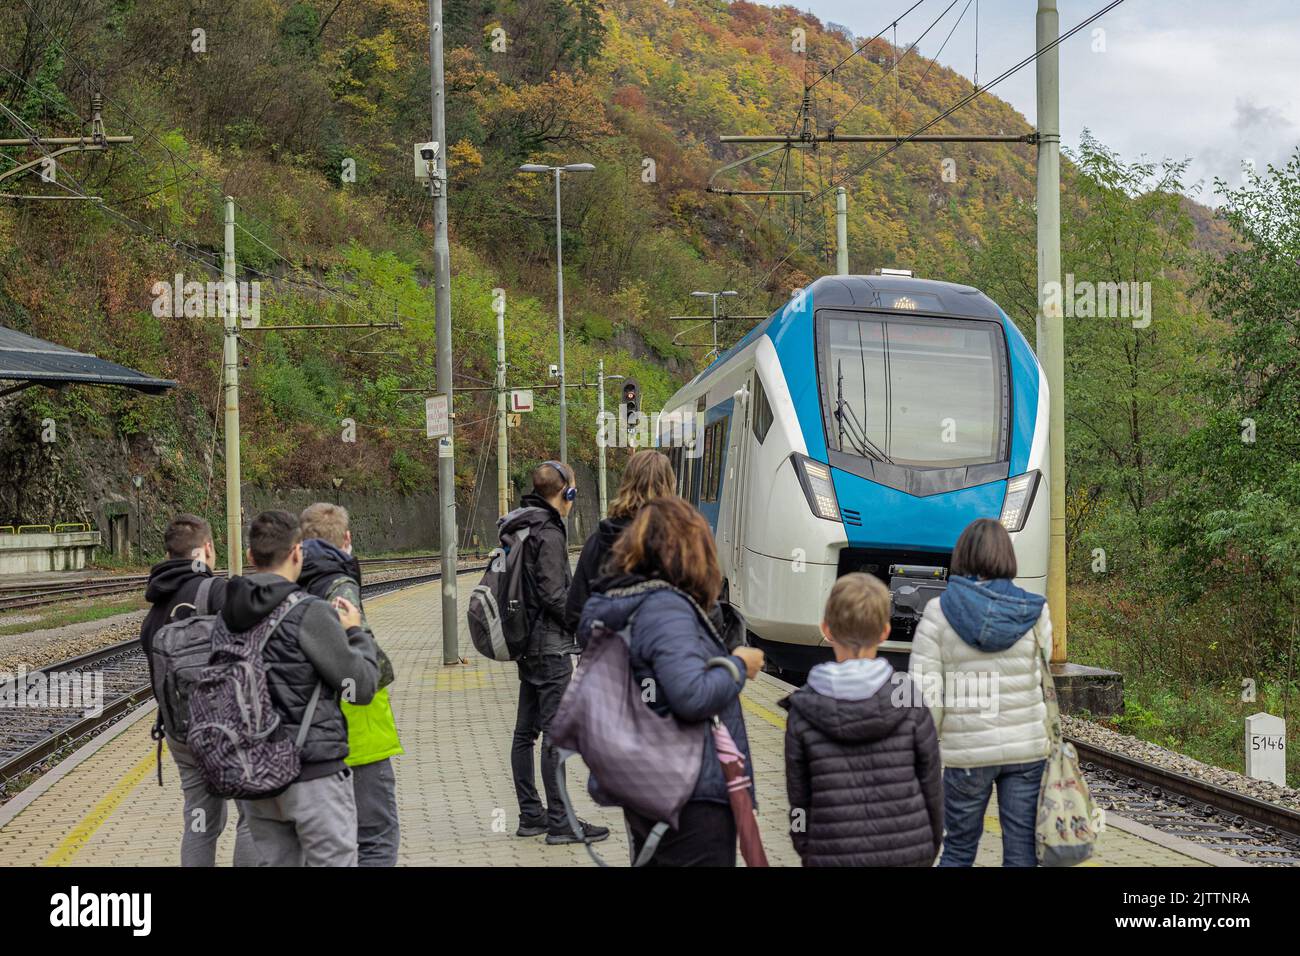 Unknown passengers are waiting at a train platform for a modern white and blue train to arrive to the station. Trbovlje, slovenia. Stock Photo